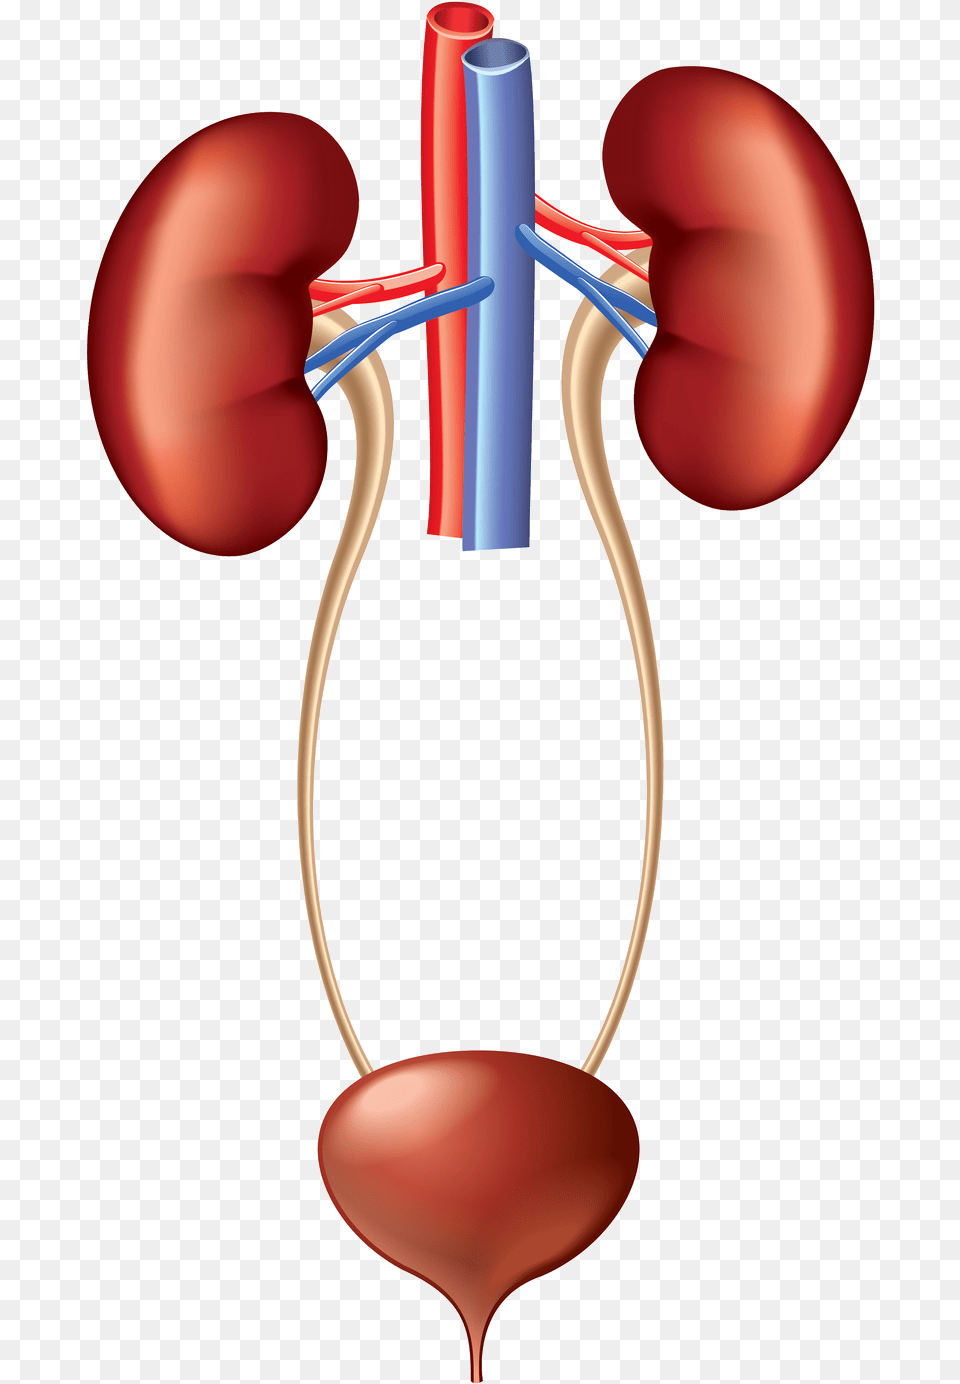 Kidney Clipart Urinary System, Heart, Dynamite, Weapon, Smoke Pipe Free Transparent Png